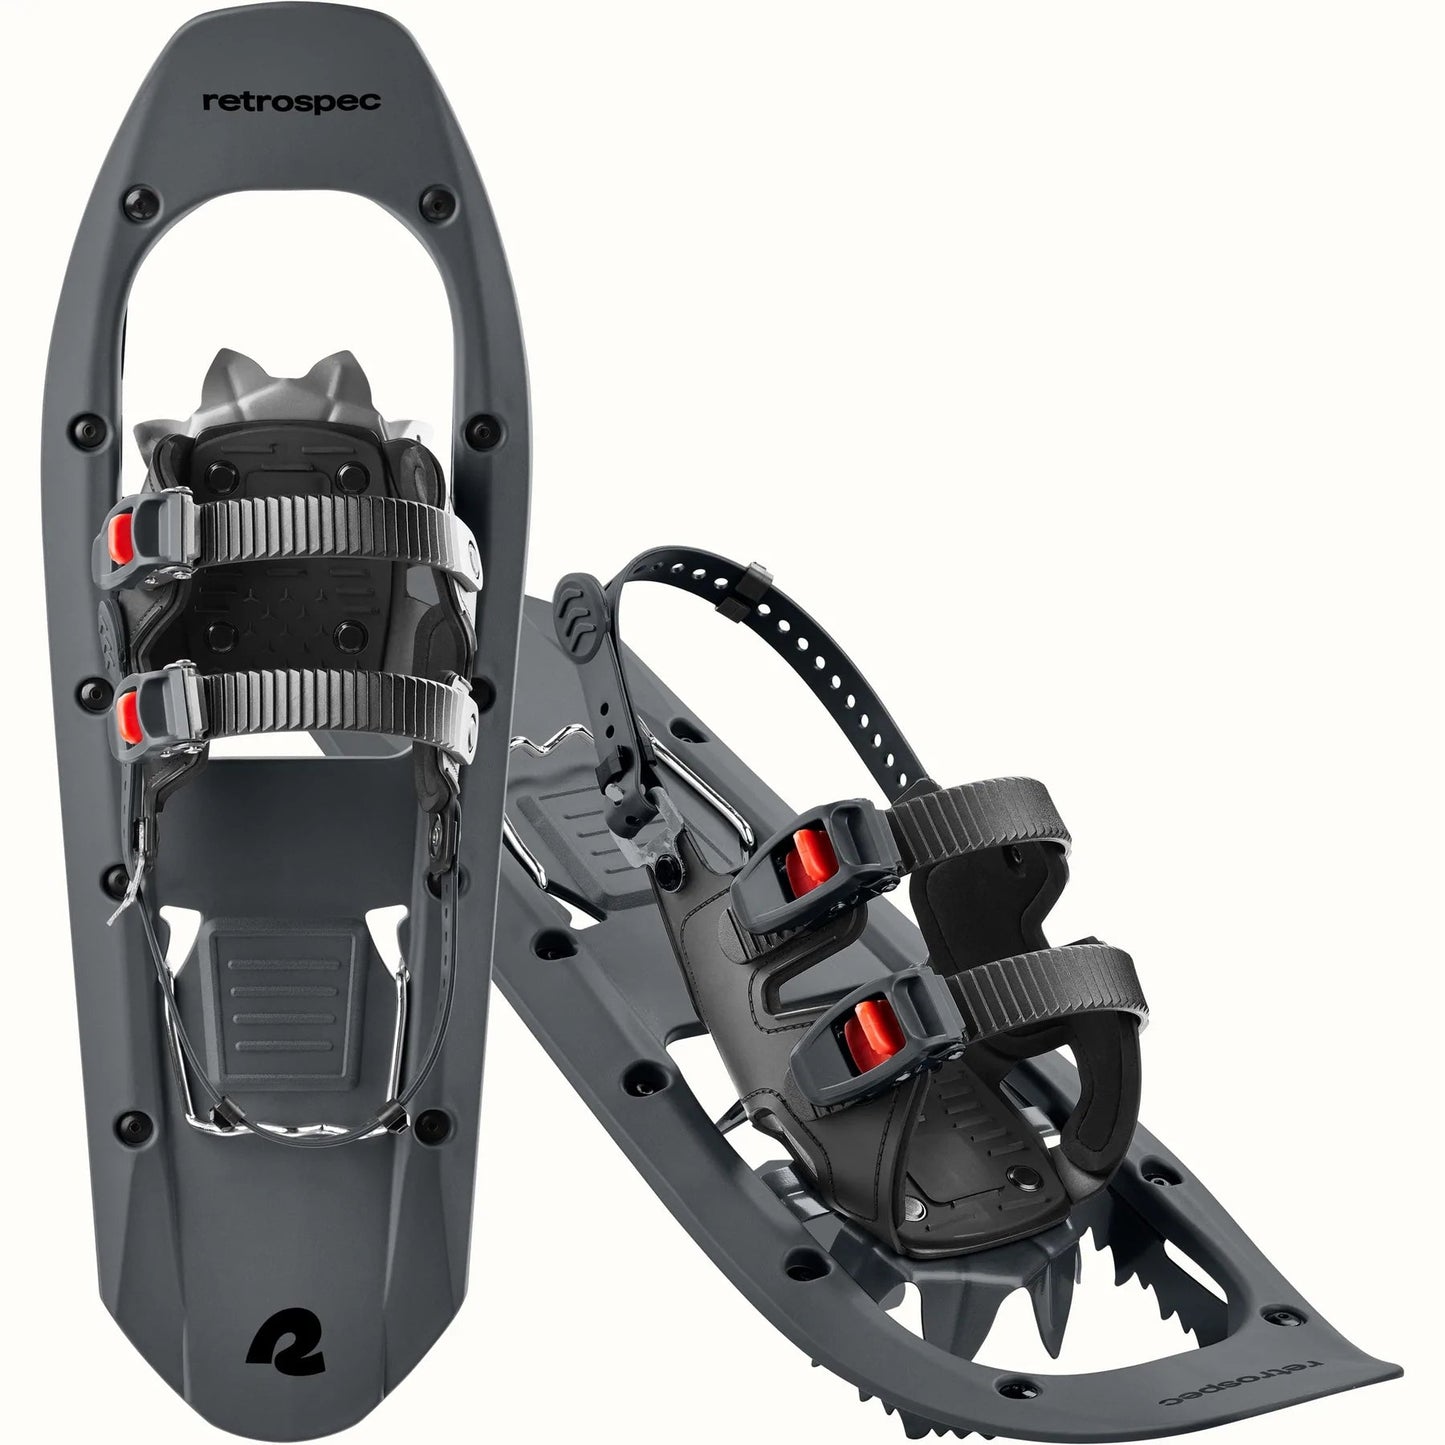 Retrospec Drifter Plus -23 In Snowshoes, 23" (Up to 200 Lbs)